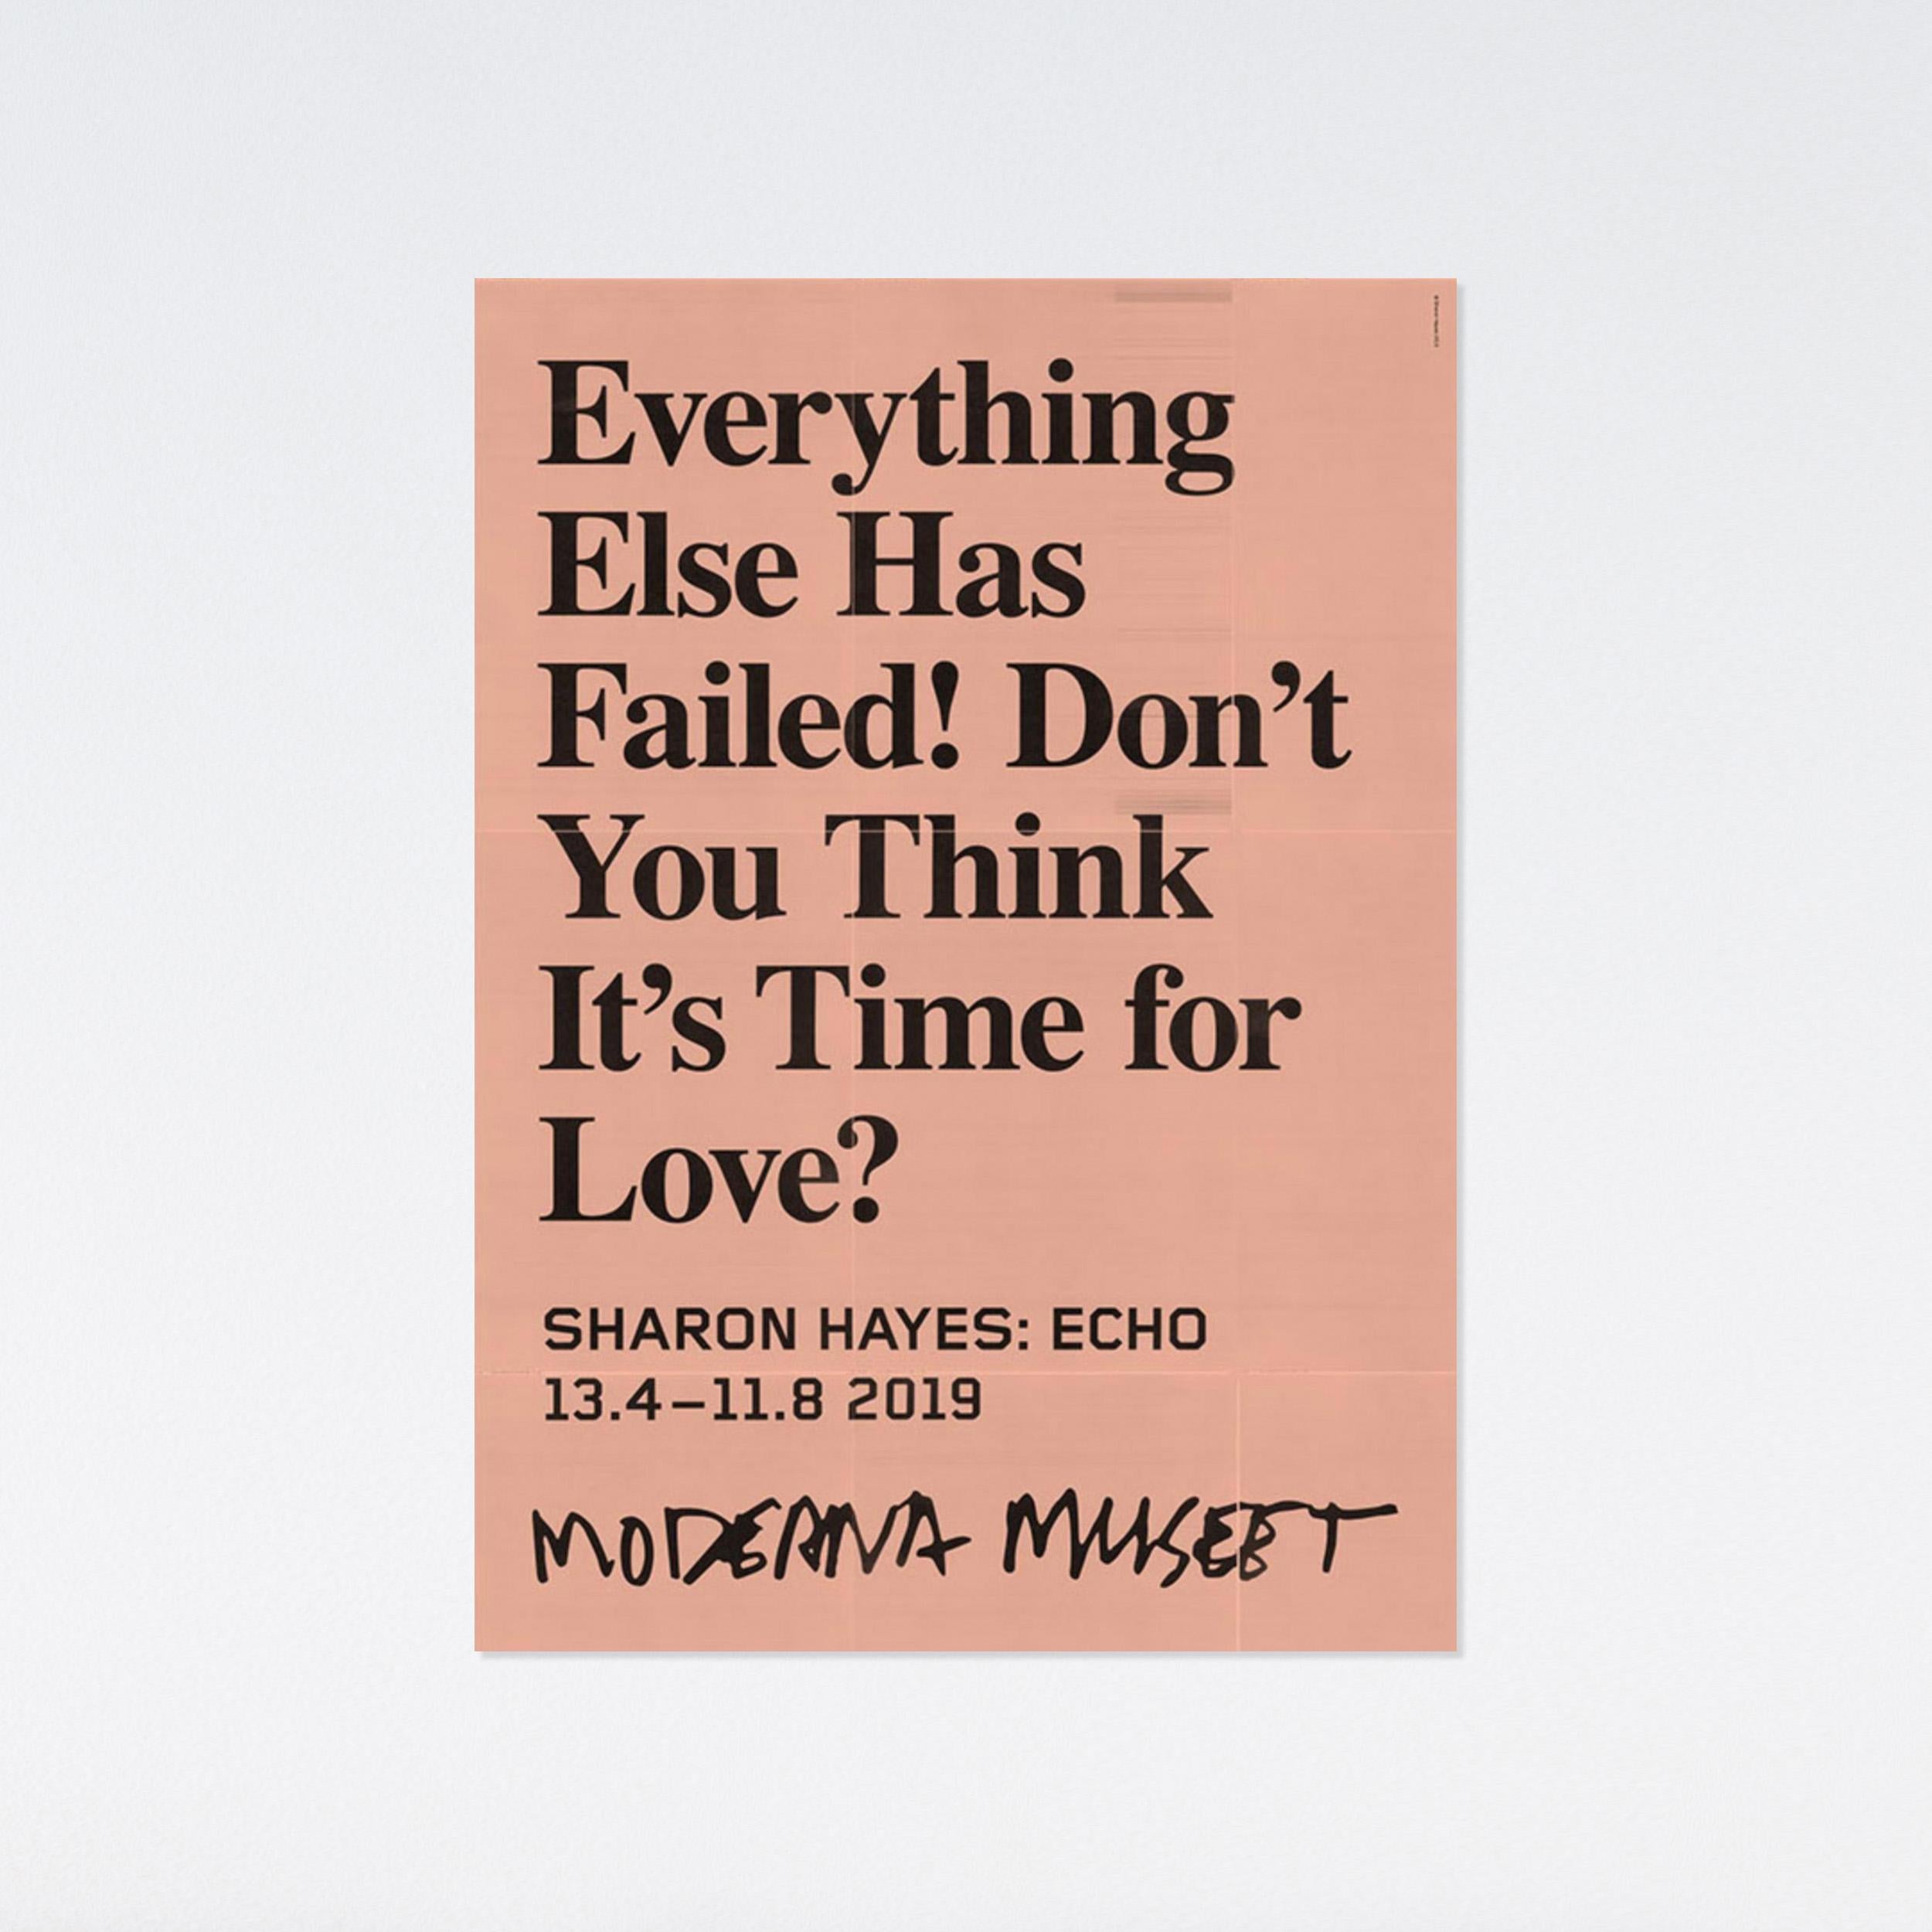 Everything Else Has Failed! Don't You Think It's Time for Love? Museum Poster - Print by Sharon Hayes